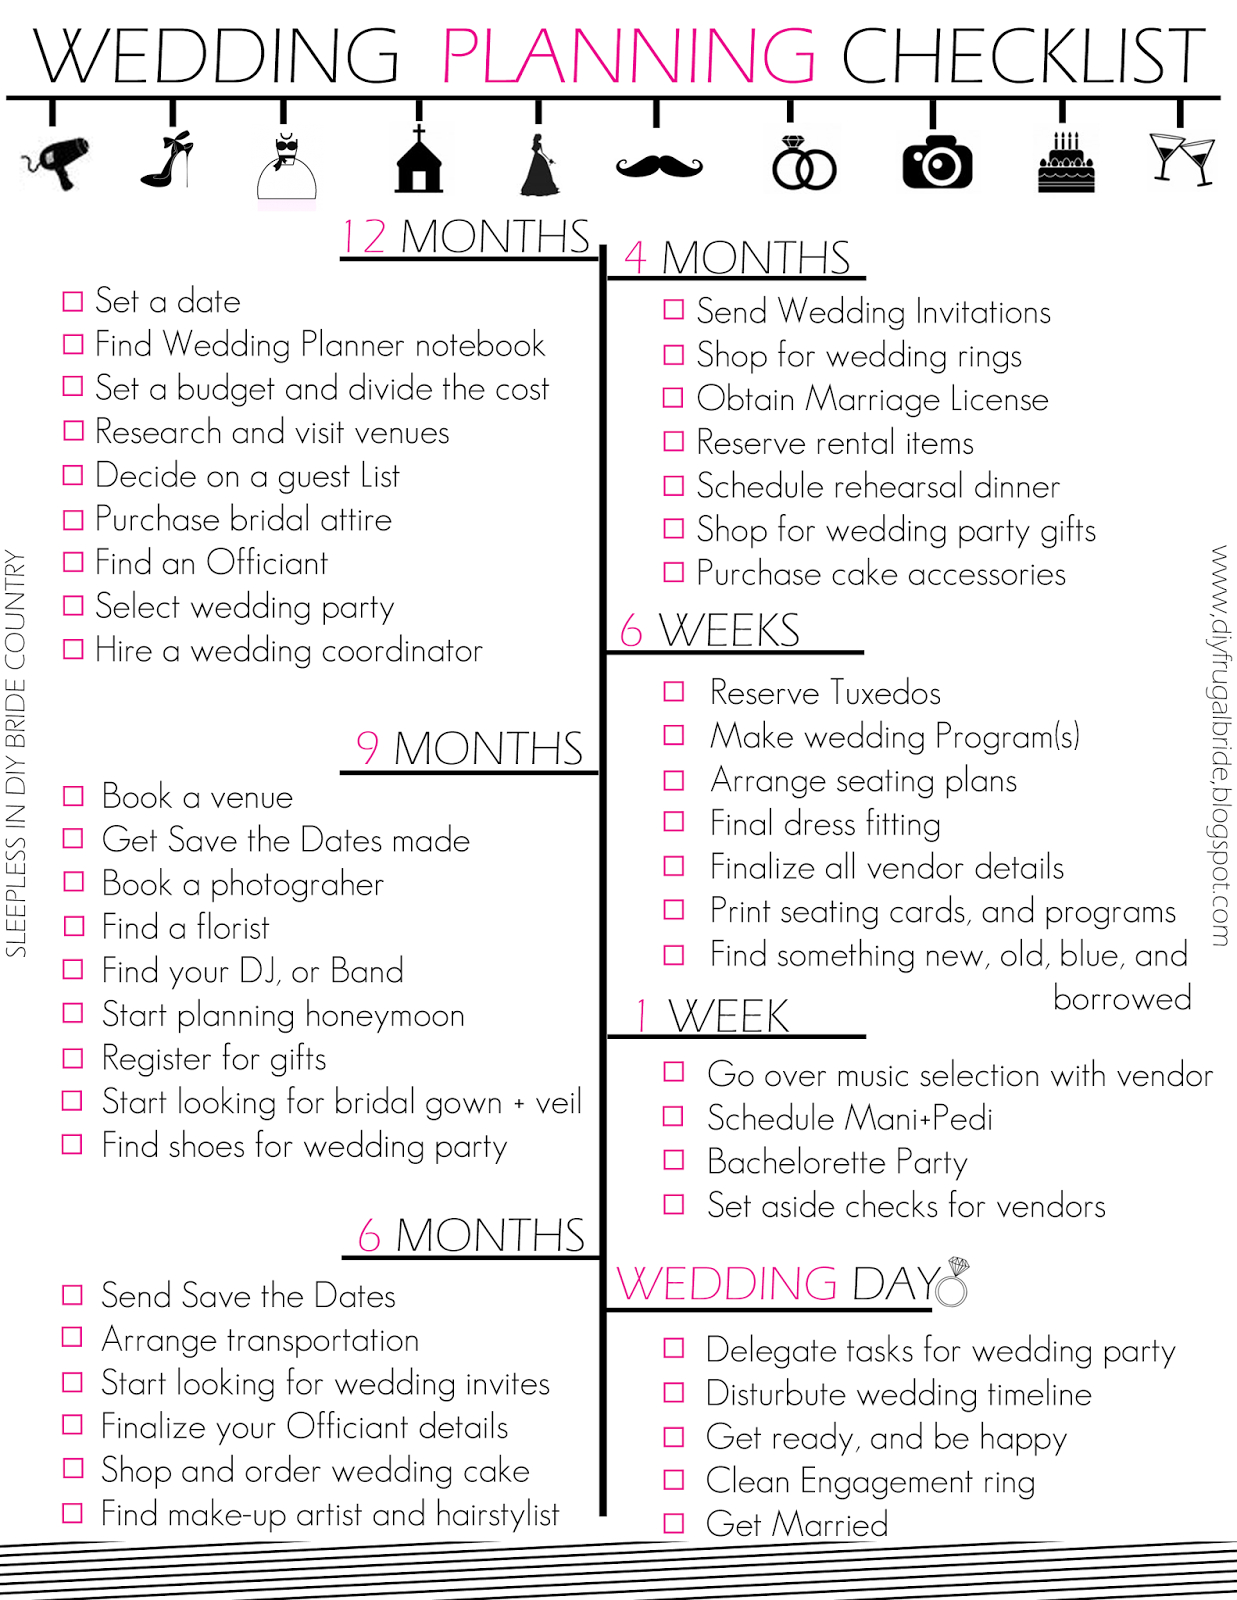 Budget Bride Wedding Checklist And Budget Tips | Projects To Try In - Free Printable Wedding Checklist